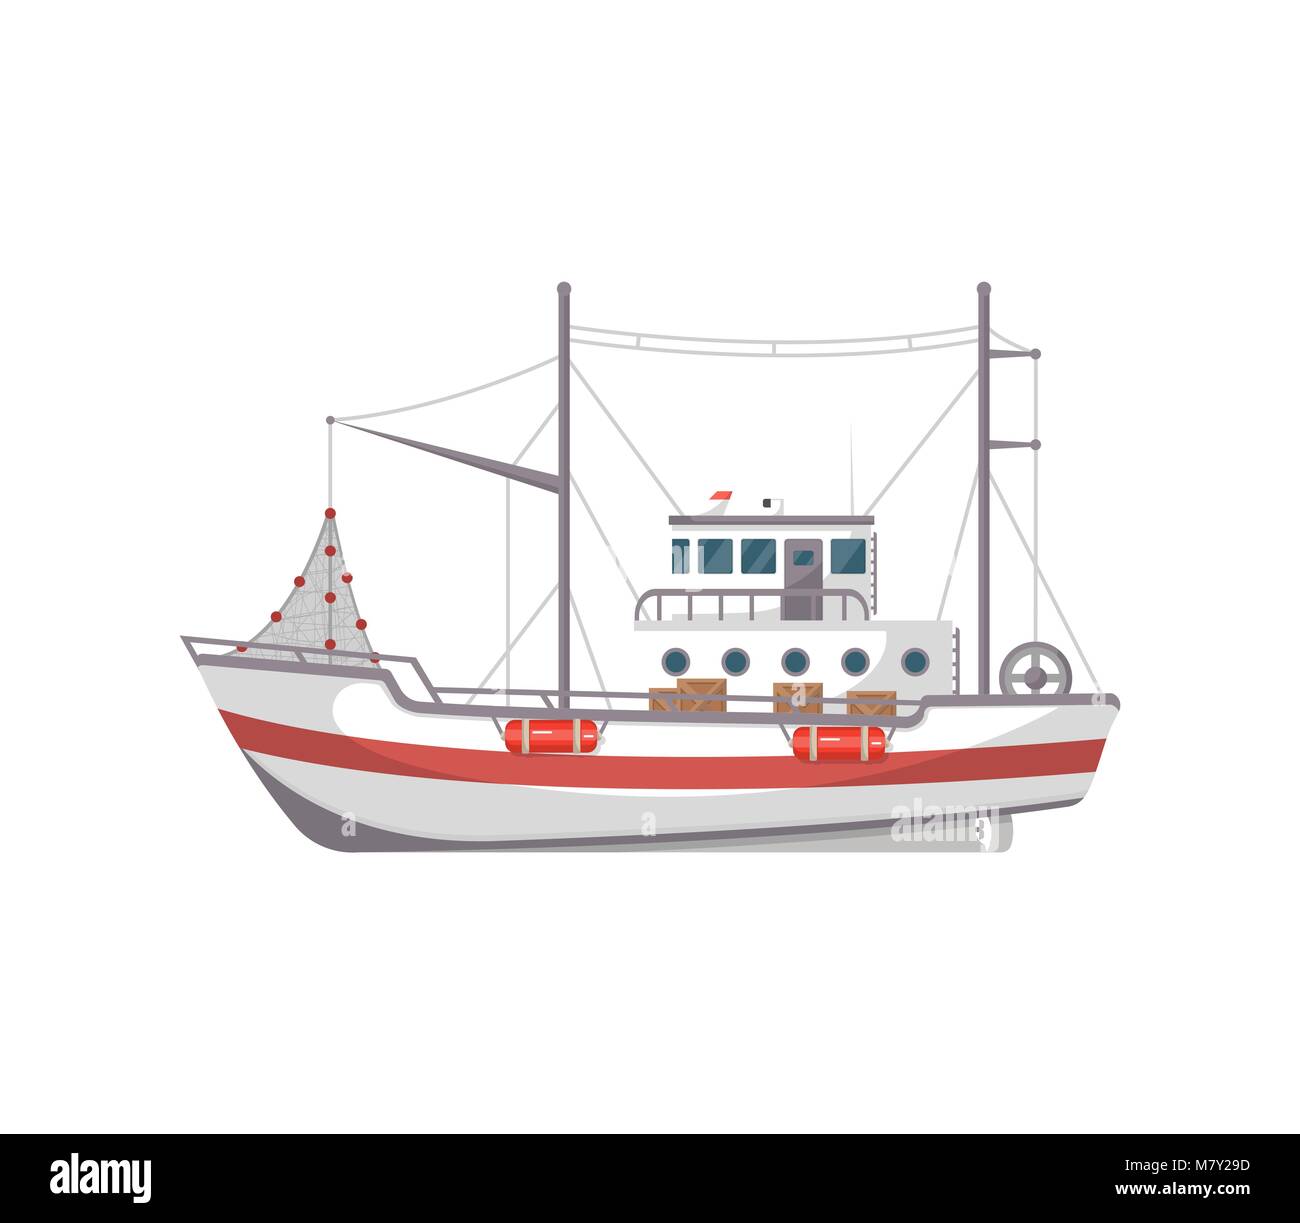 Fishing boat side view icon Stock Vector